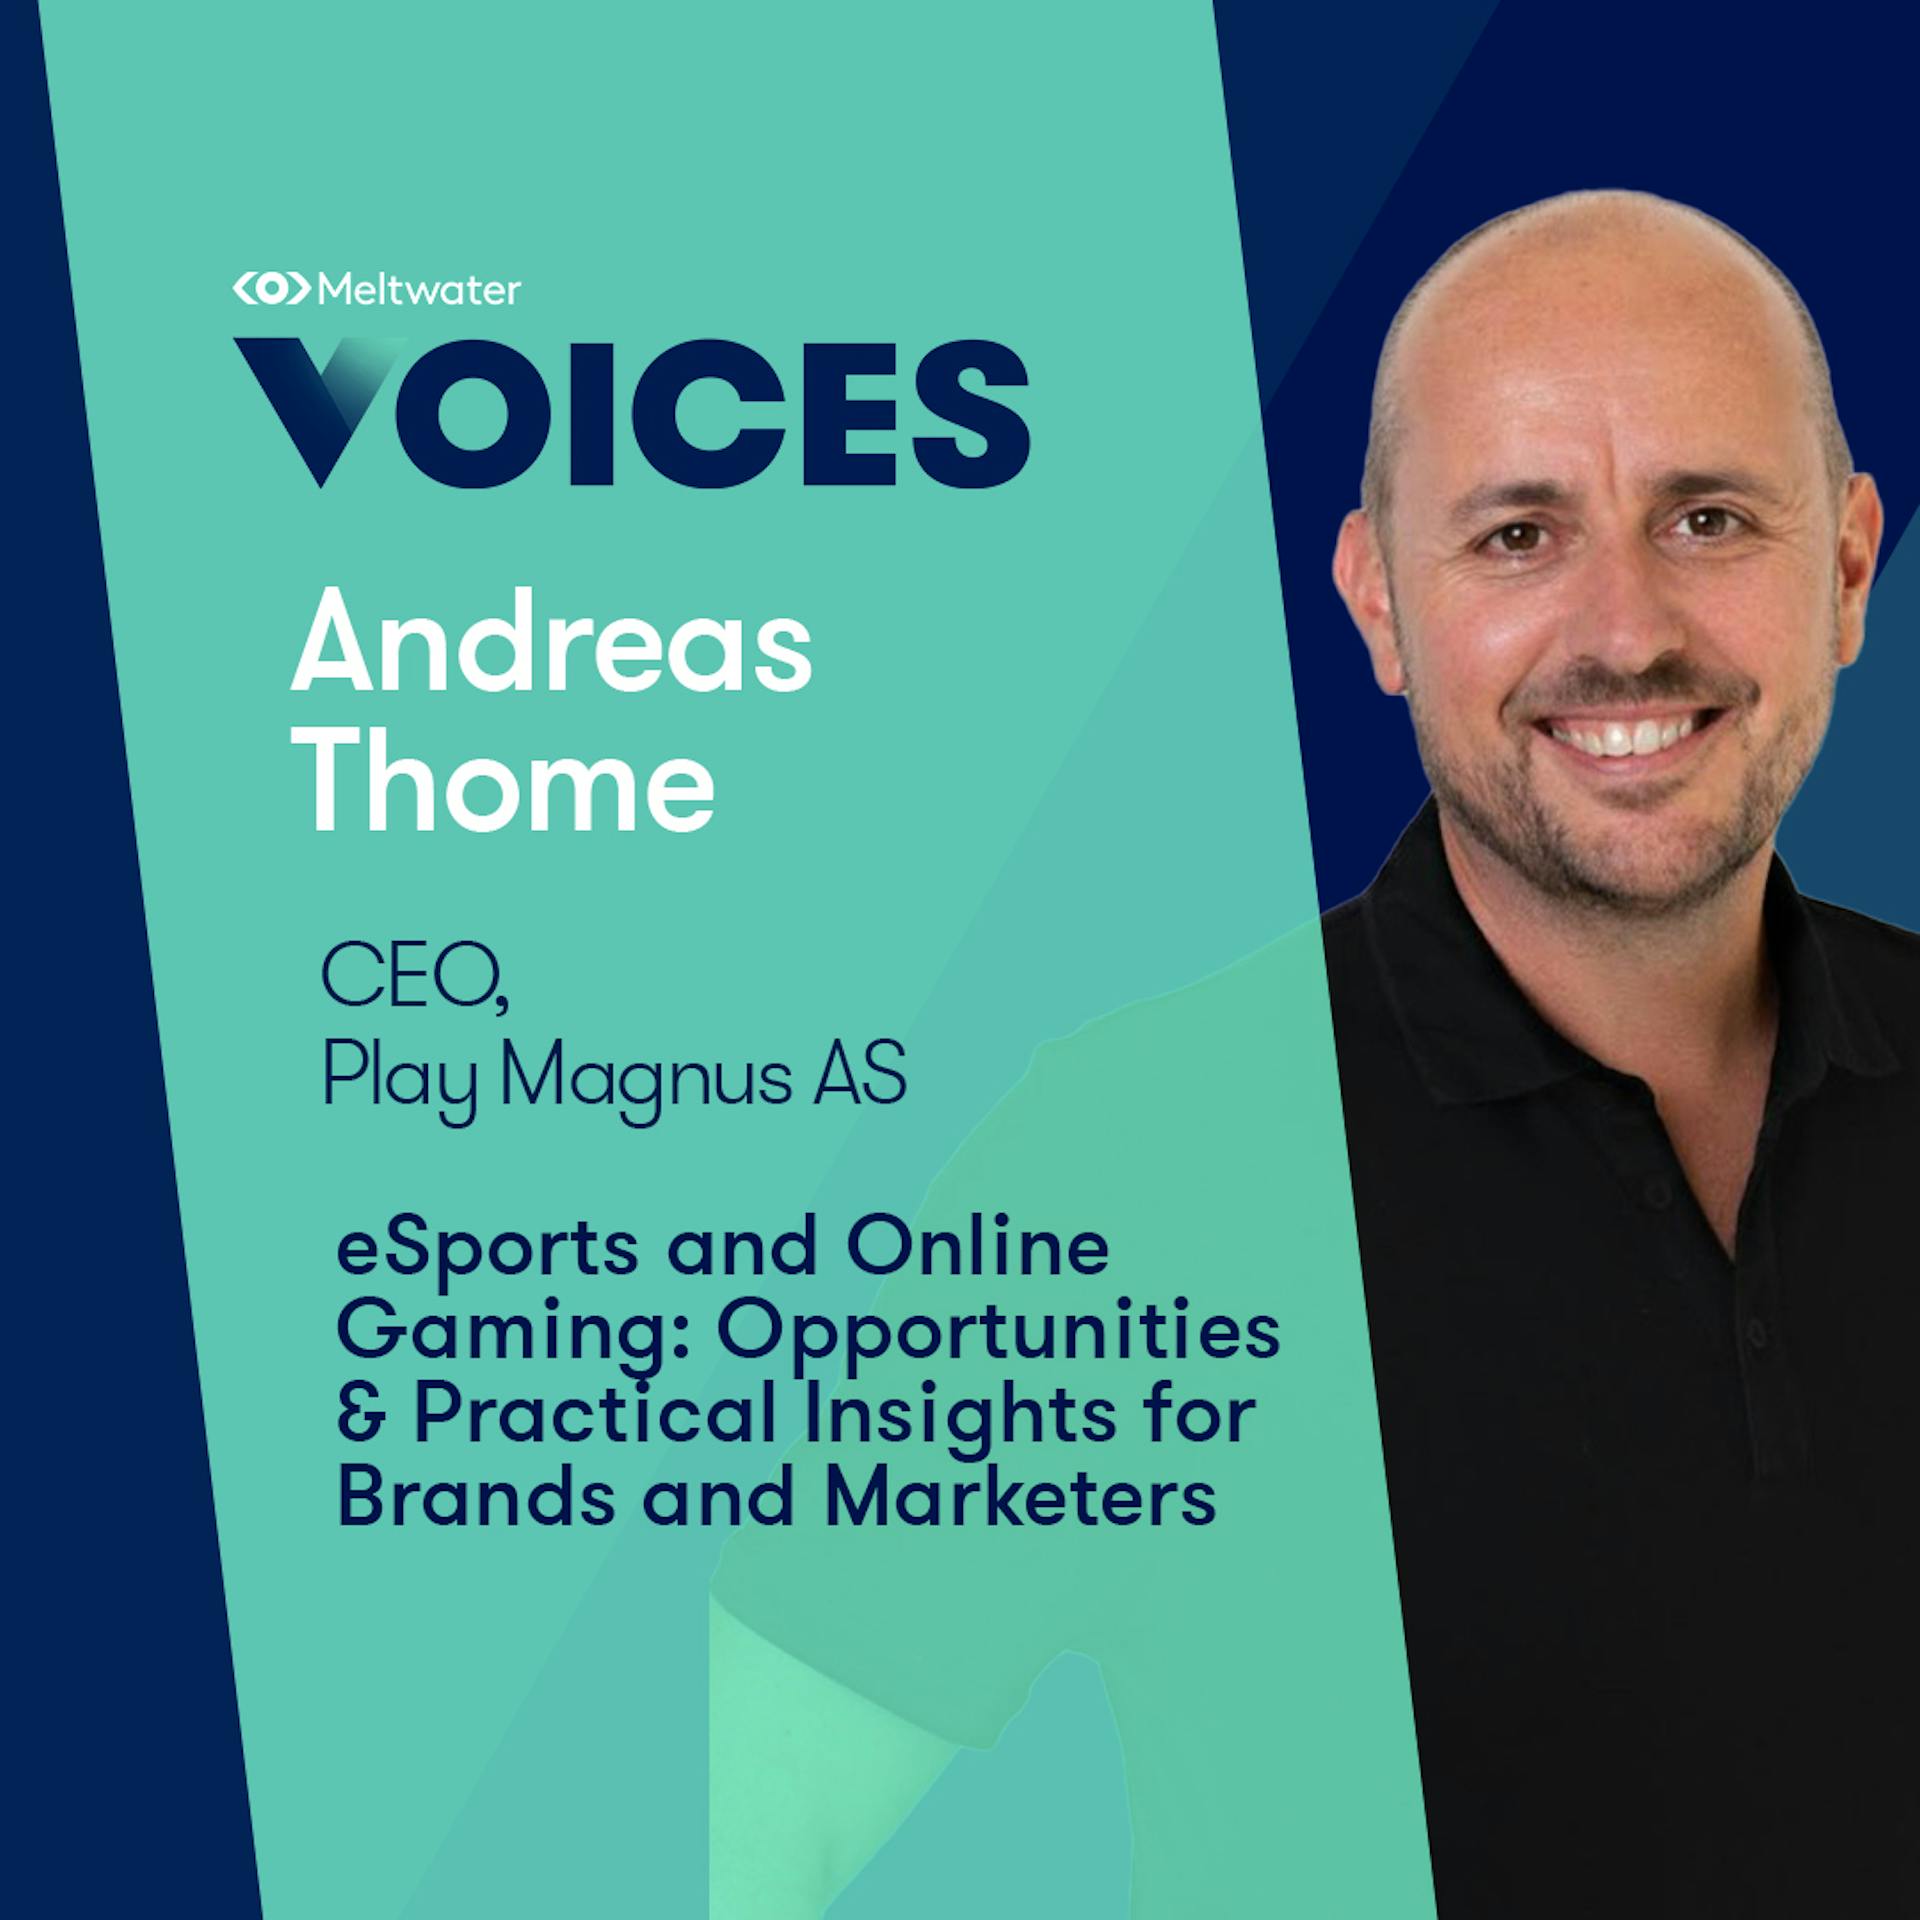 Meltwater Voices - Digital Transformation in Communications and Marketing - Andreas Thome